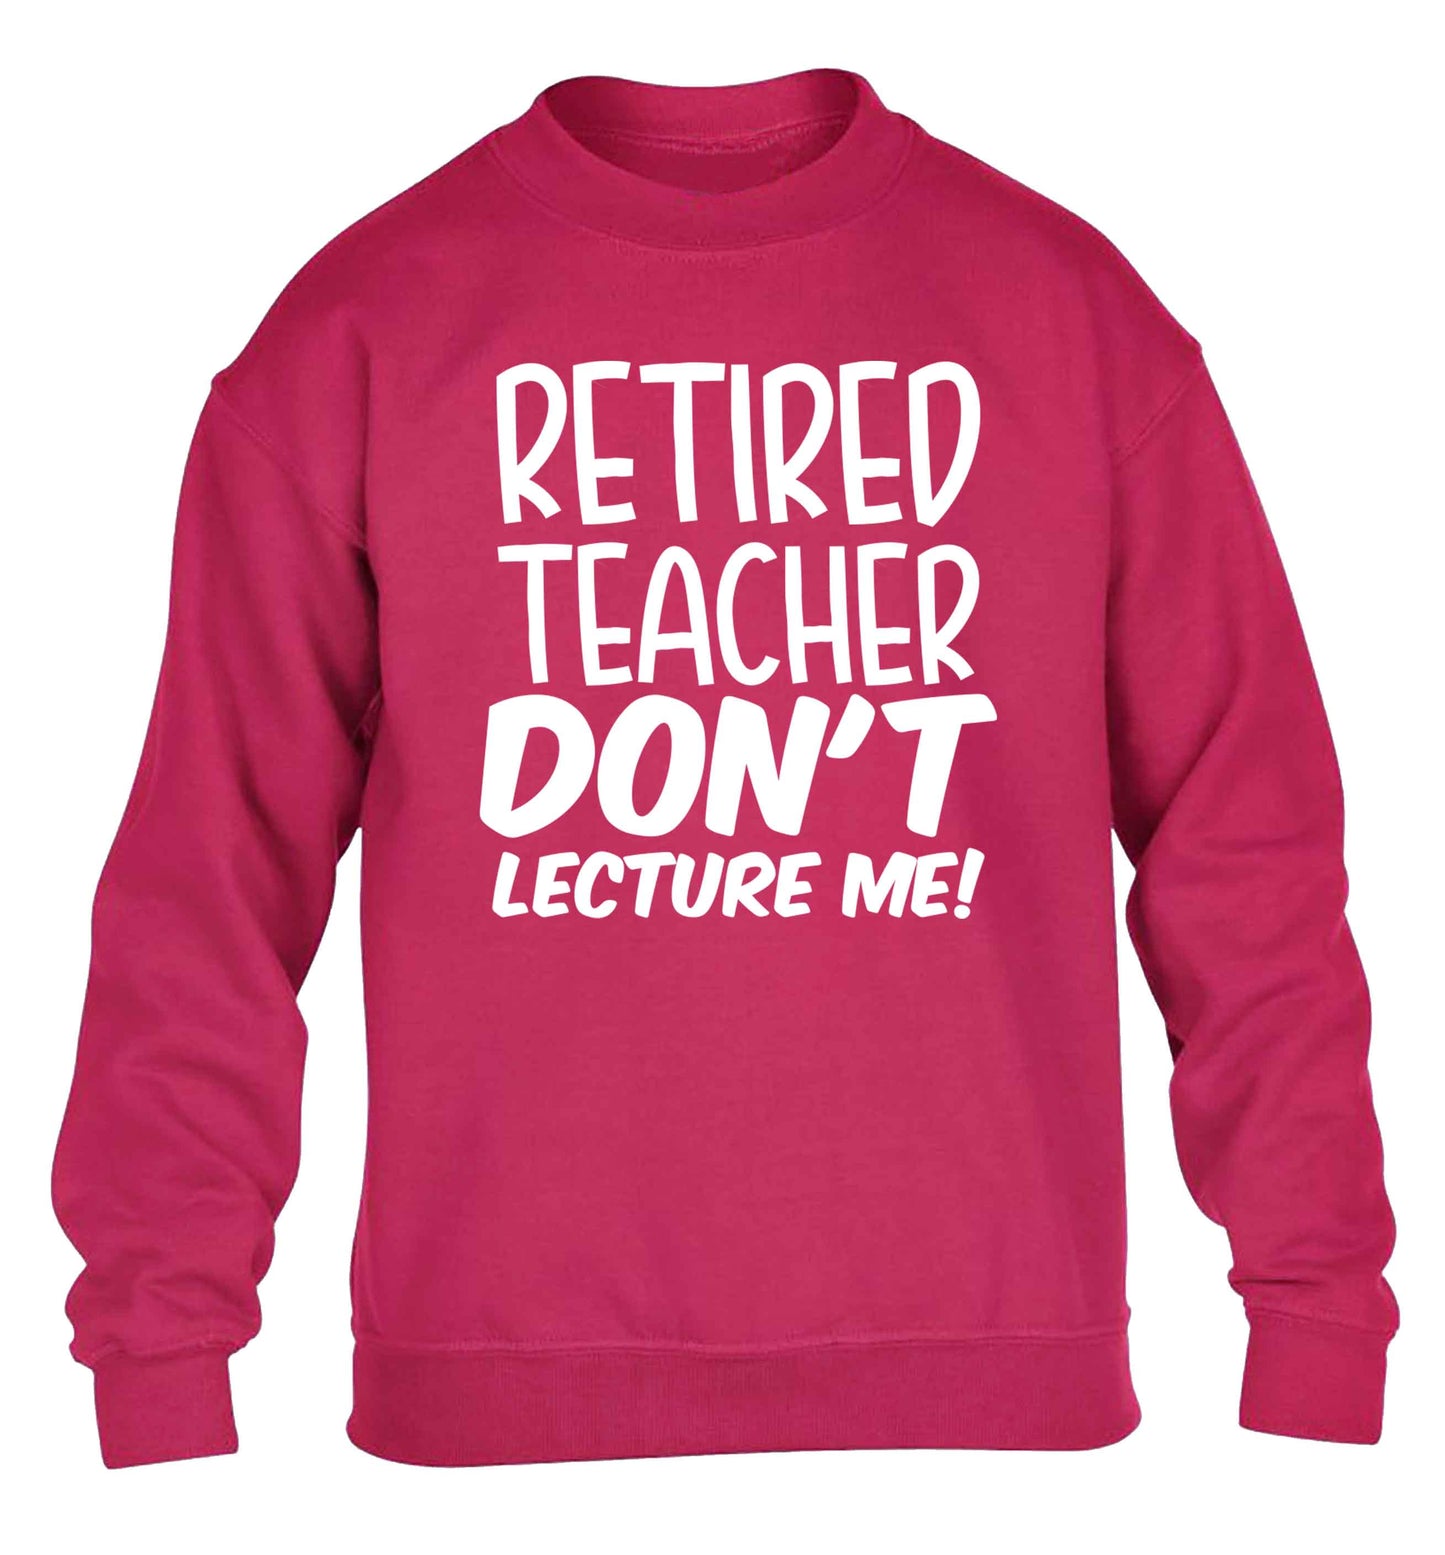 Retired teacher don't lecture me! children's pink sweater 12-13 Years